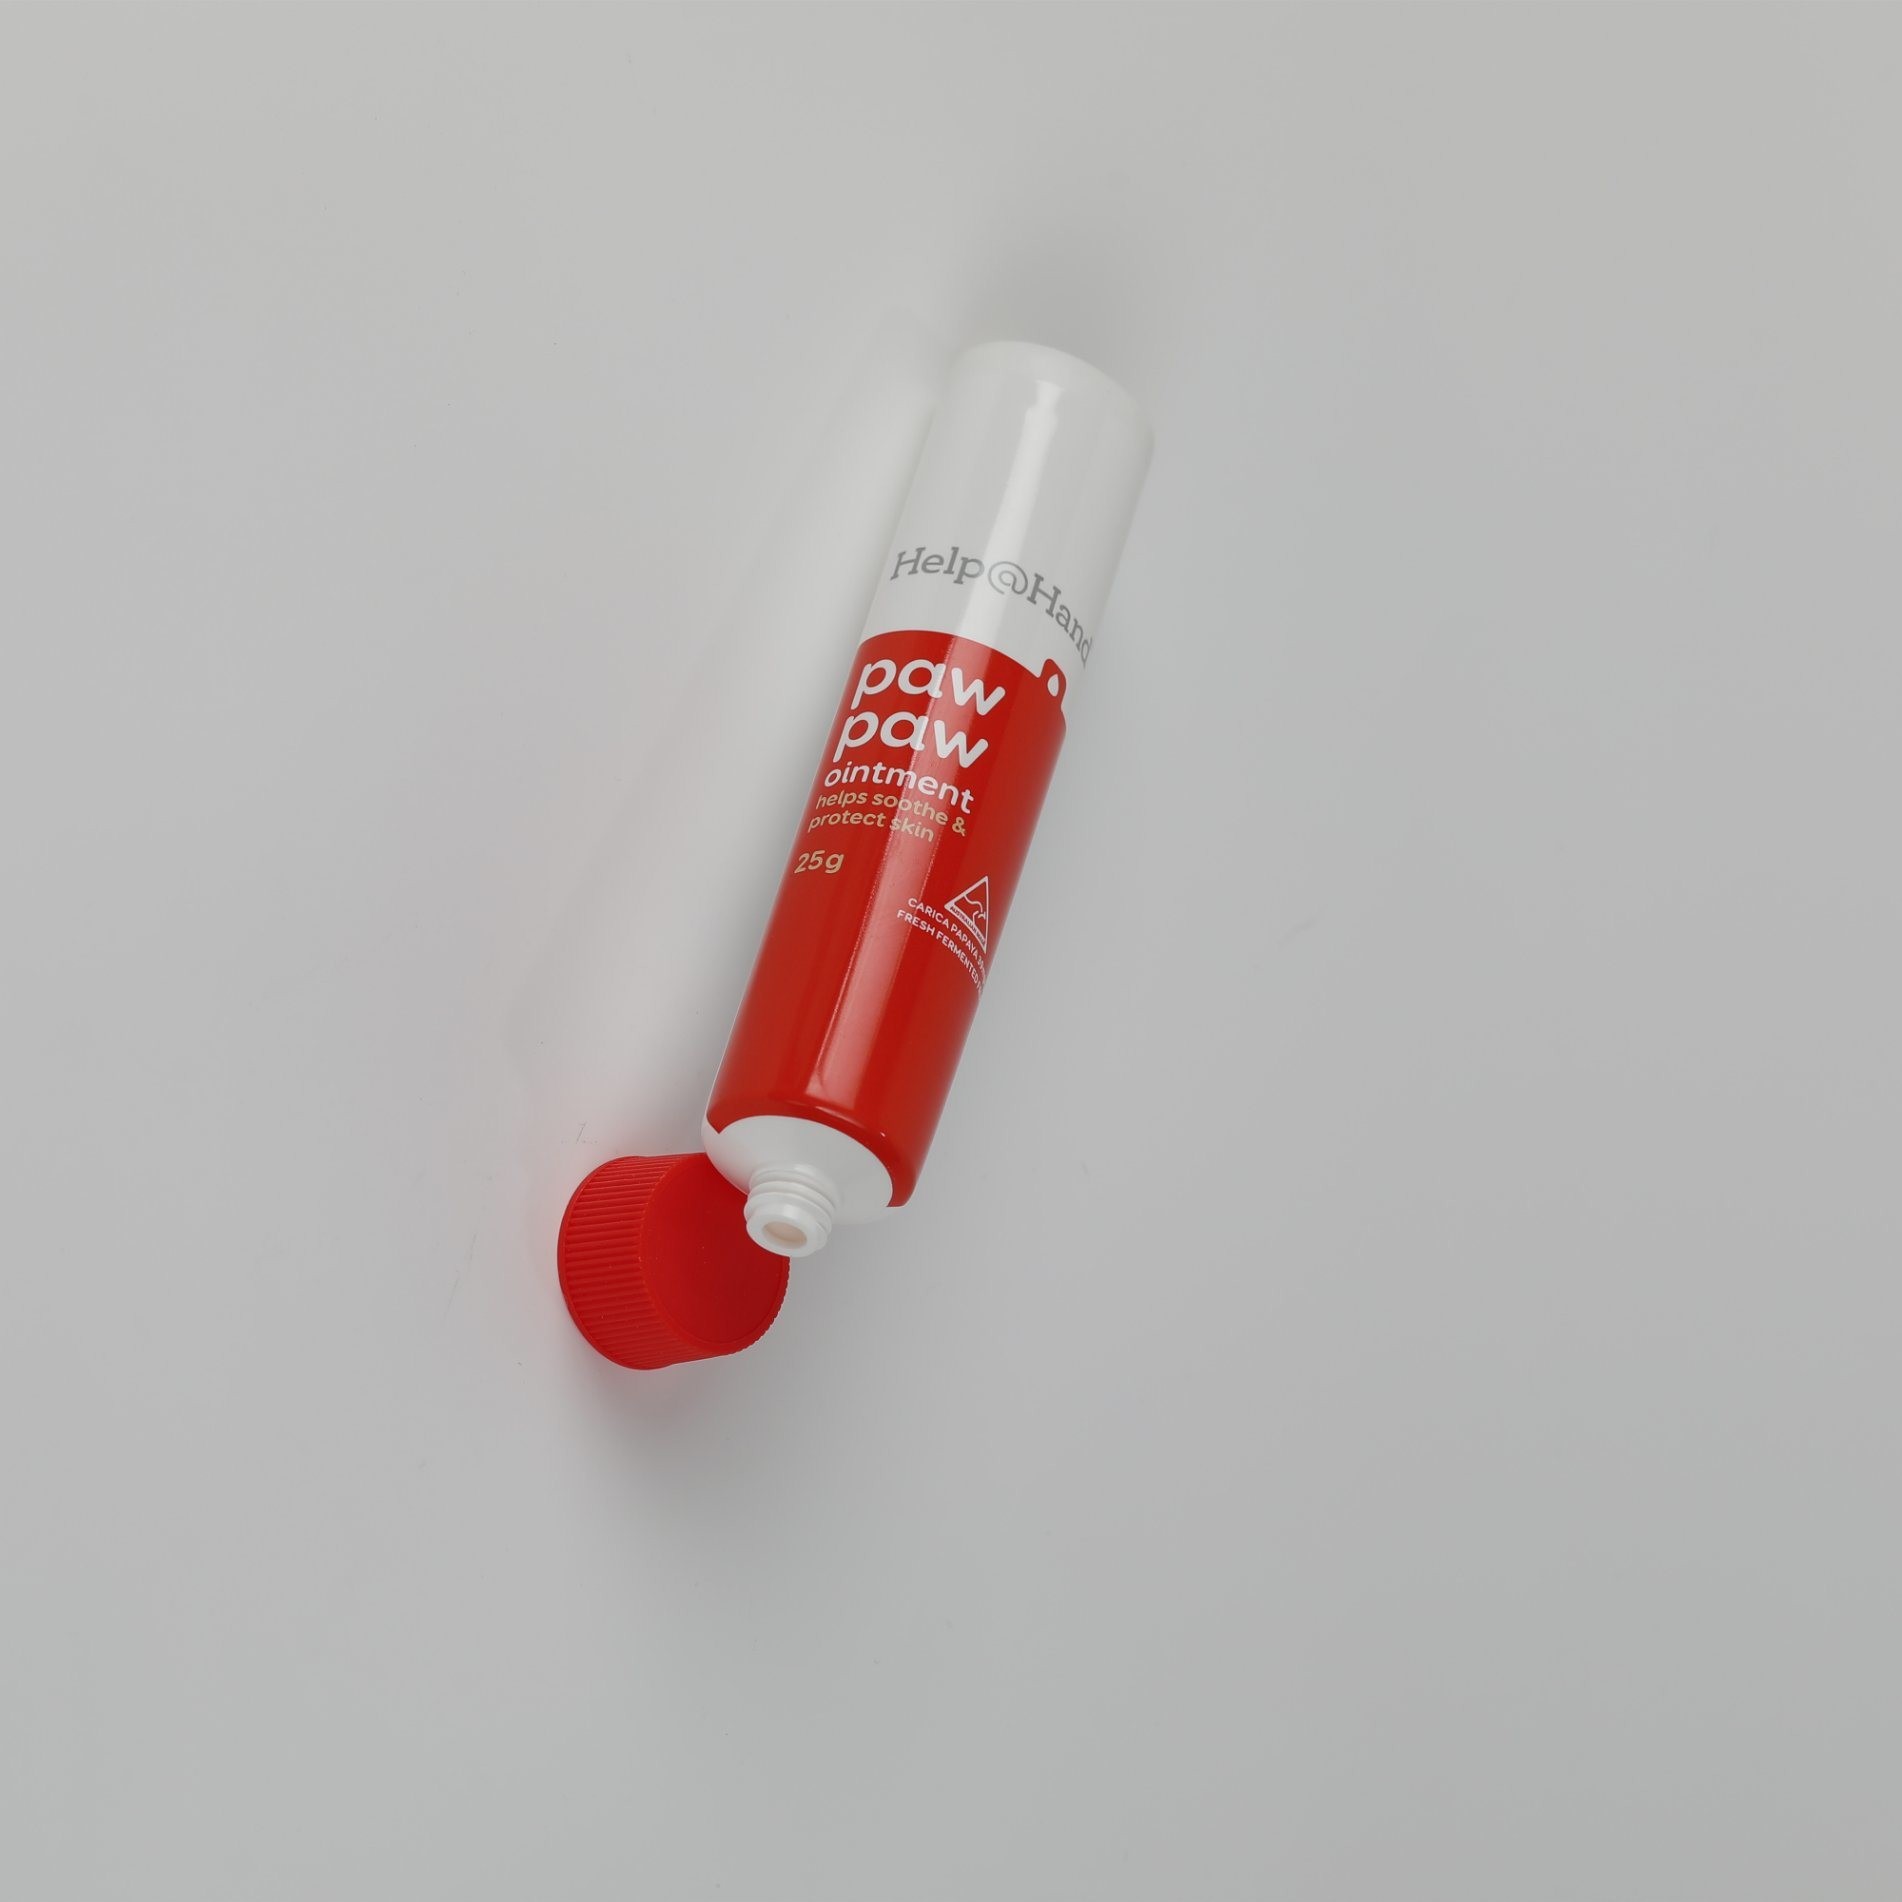 Customized Colorful Round Plastic Soft Cosmetic Packaging Squeeze Tube